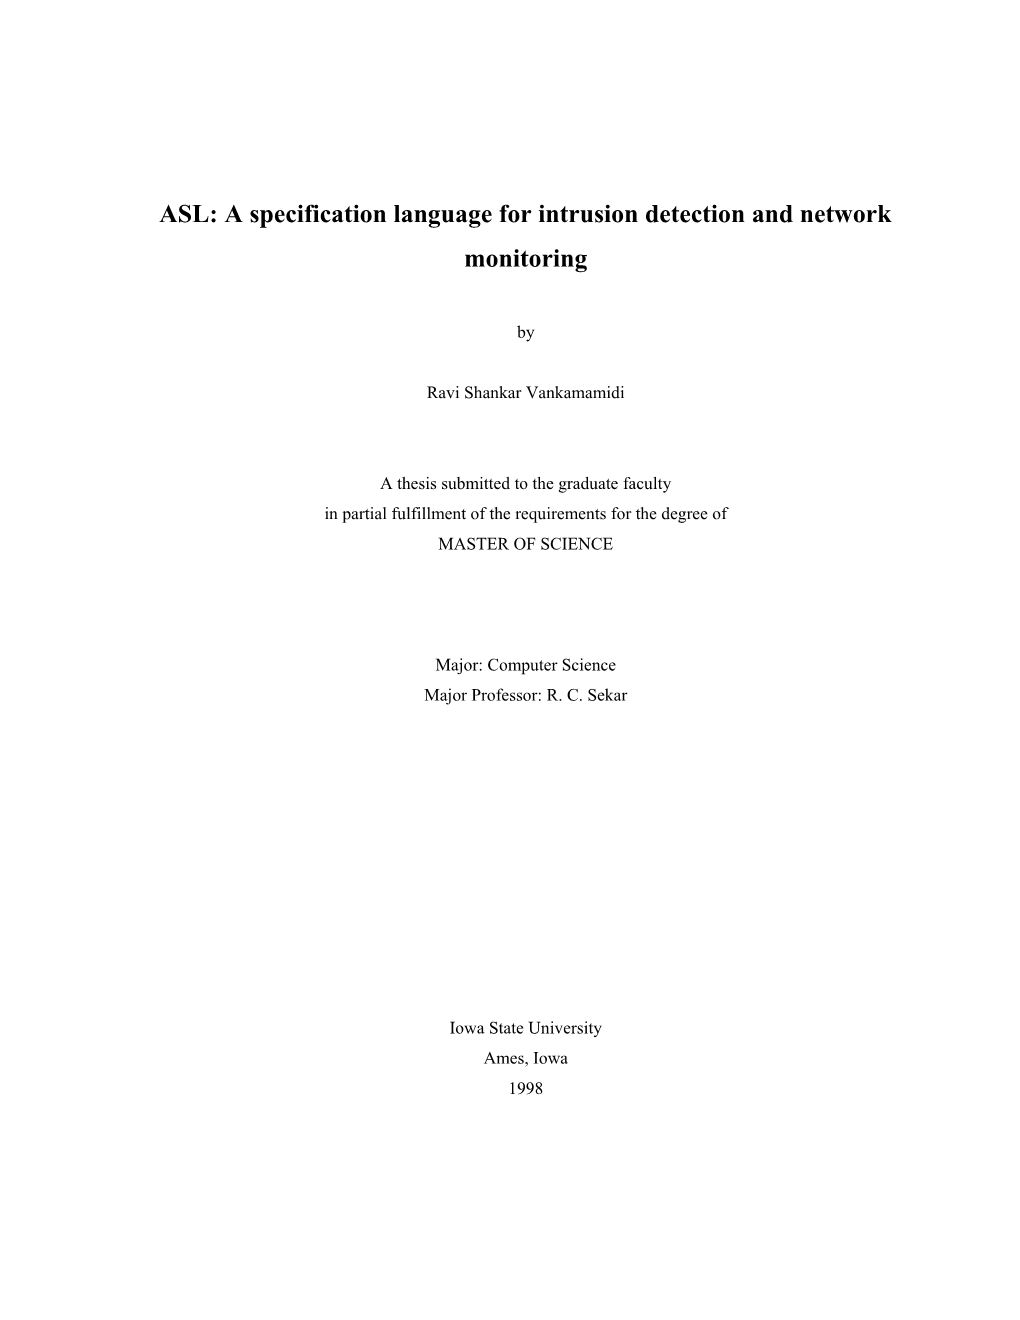 ASL : Audit Specification Language for Intrusion Detection and Network Monitoring